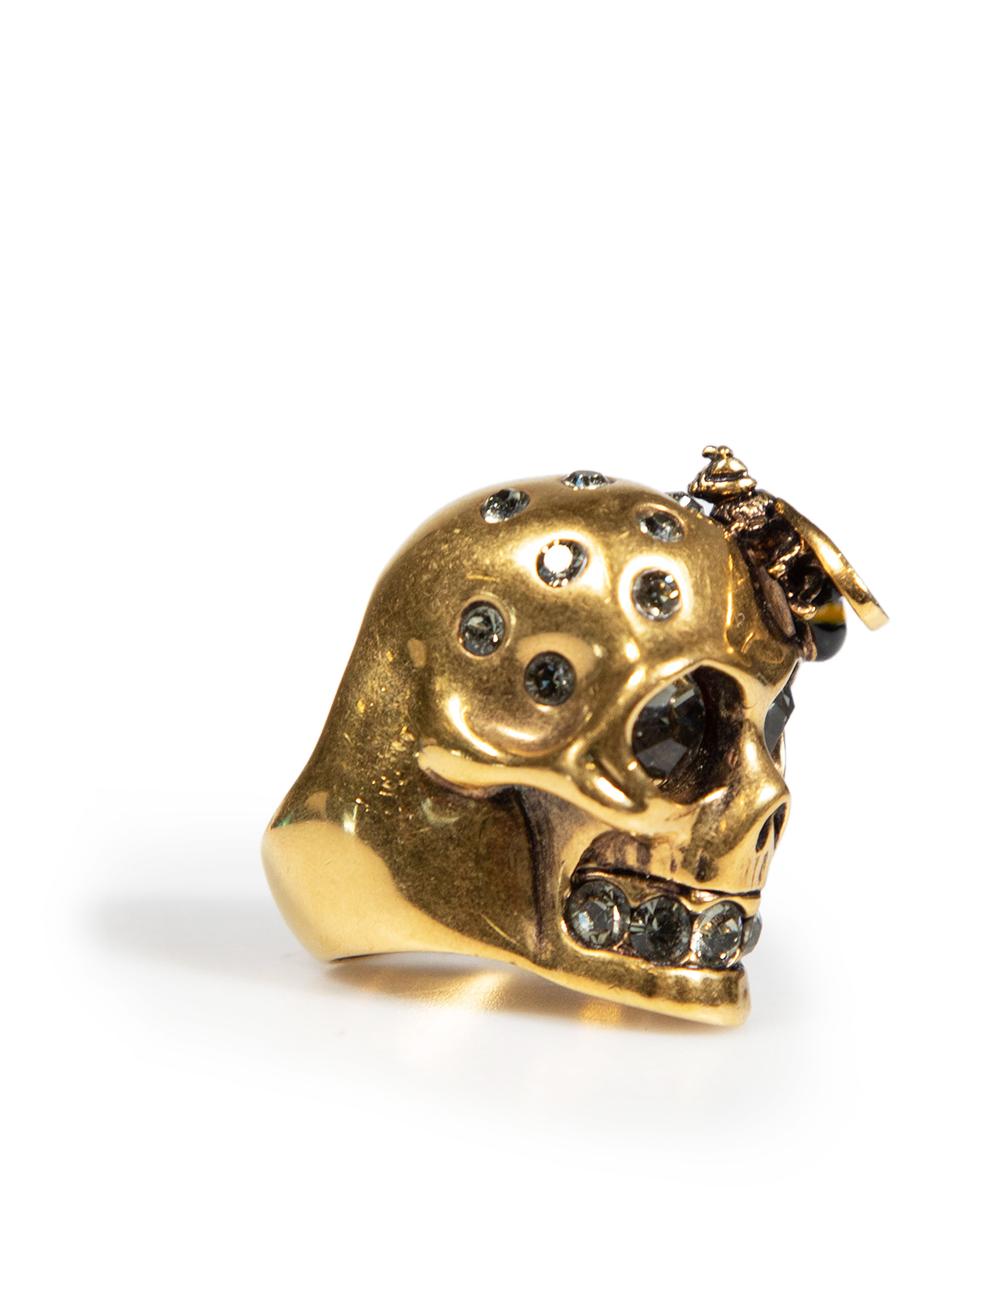 CONDITION is Very good. Minimal wear to ring is evident. Minimal wear to the rear with scratches to the metal on this used Alexander McQueen designer resale item.
 
Details
Gold
Metal
Statment ring
Skull bee detail
Crystal embellished
